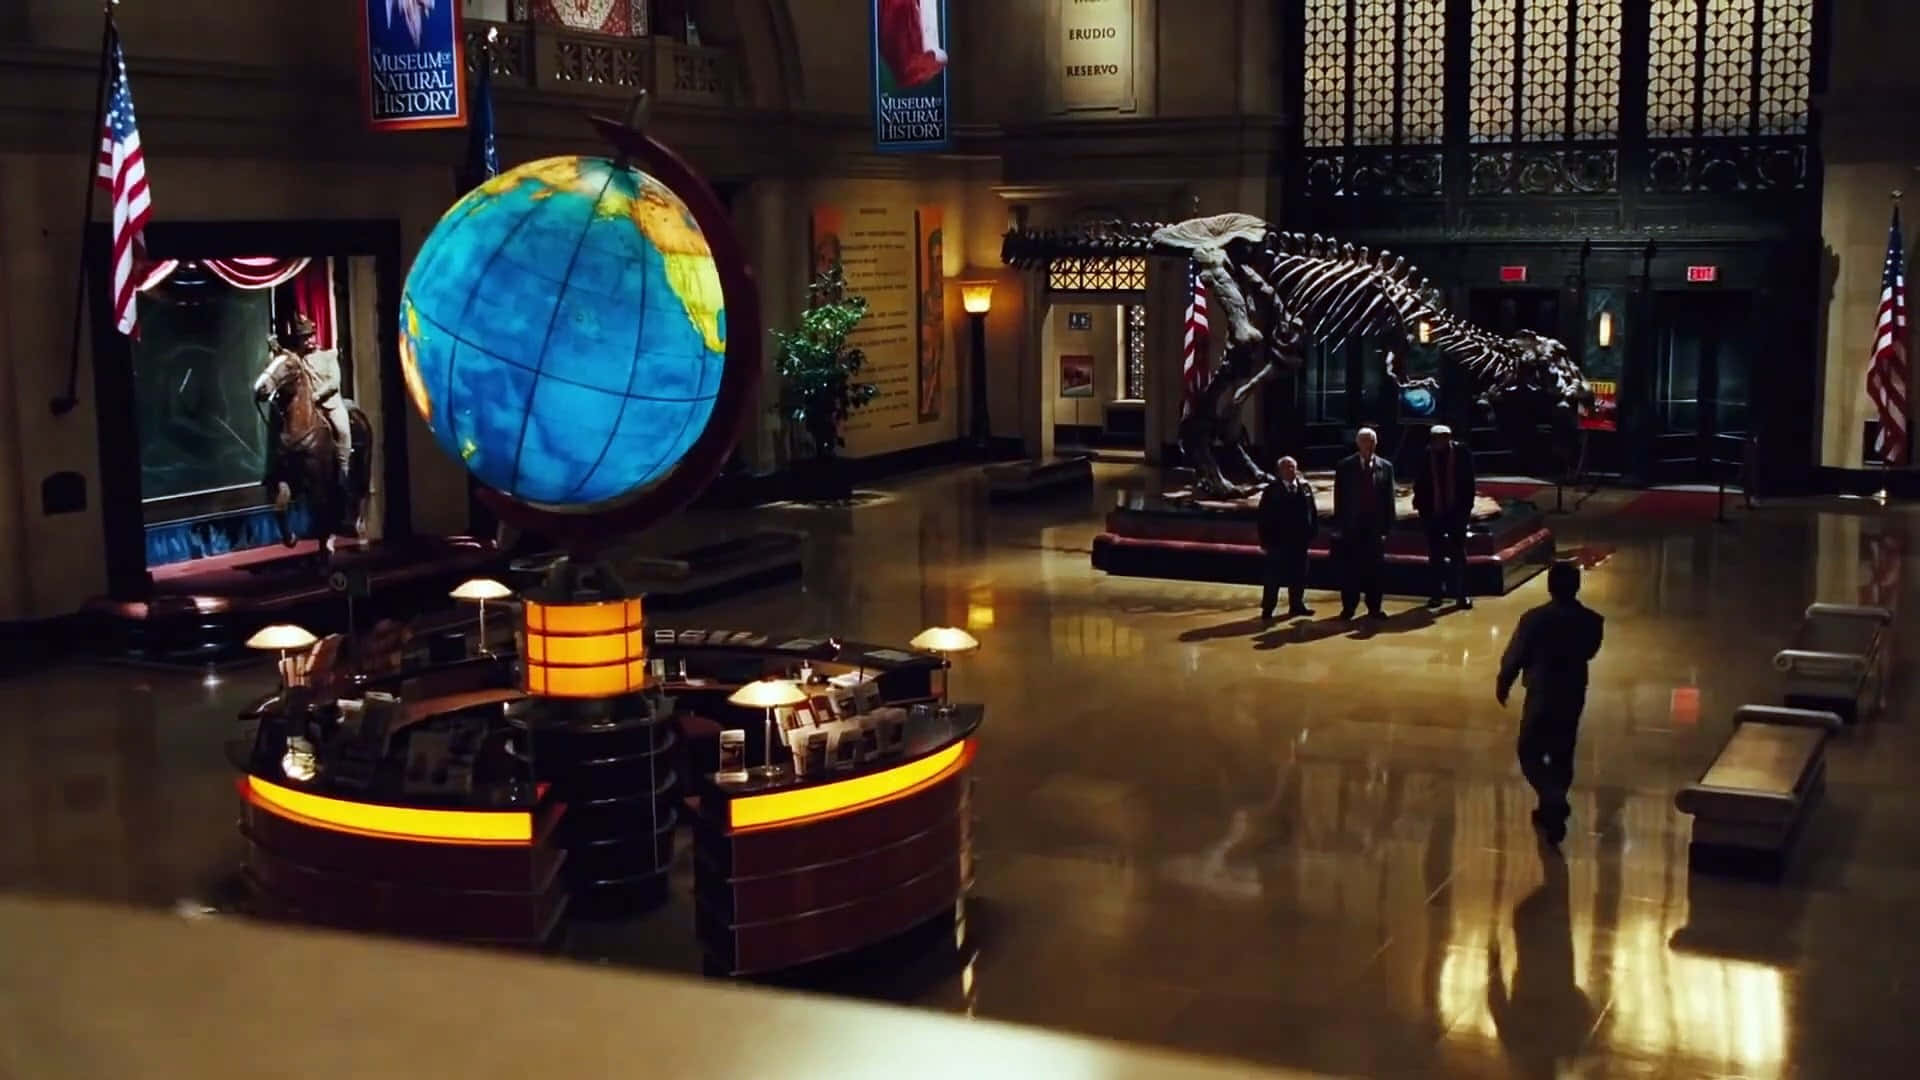 A Museum With A Large Globe And A Dinosaur Skeleton